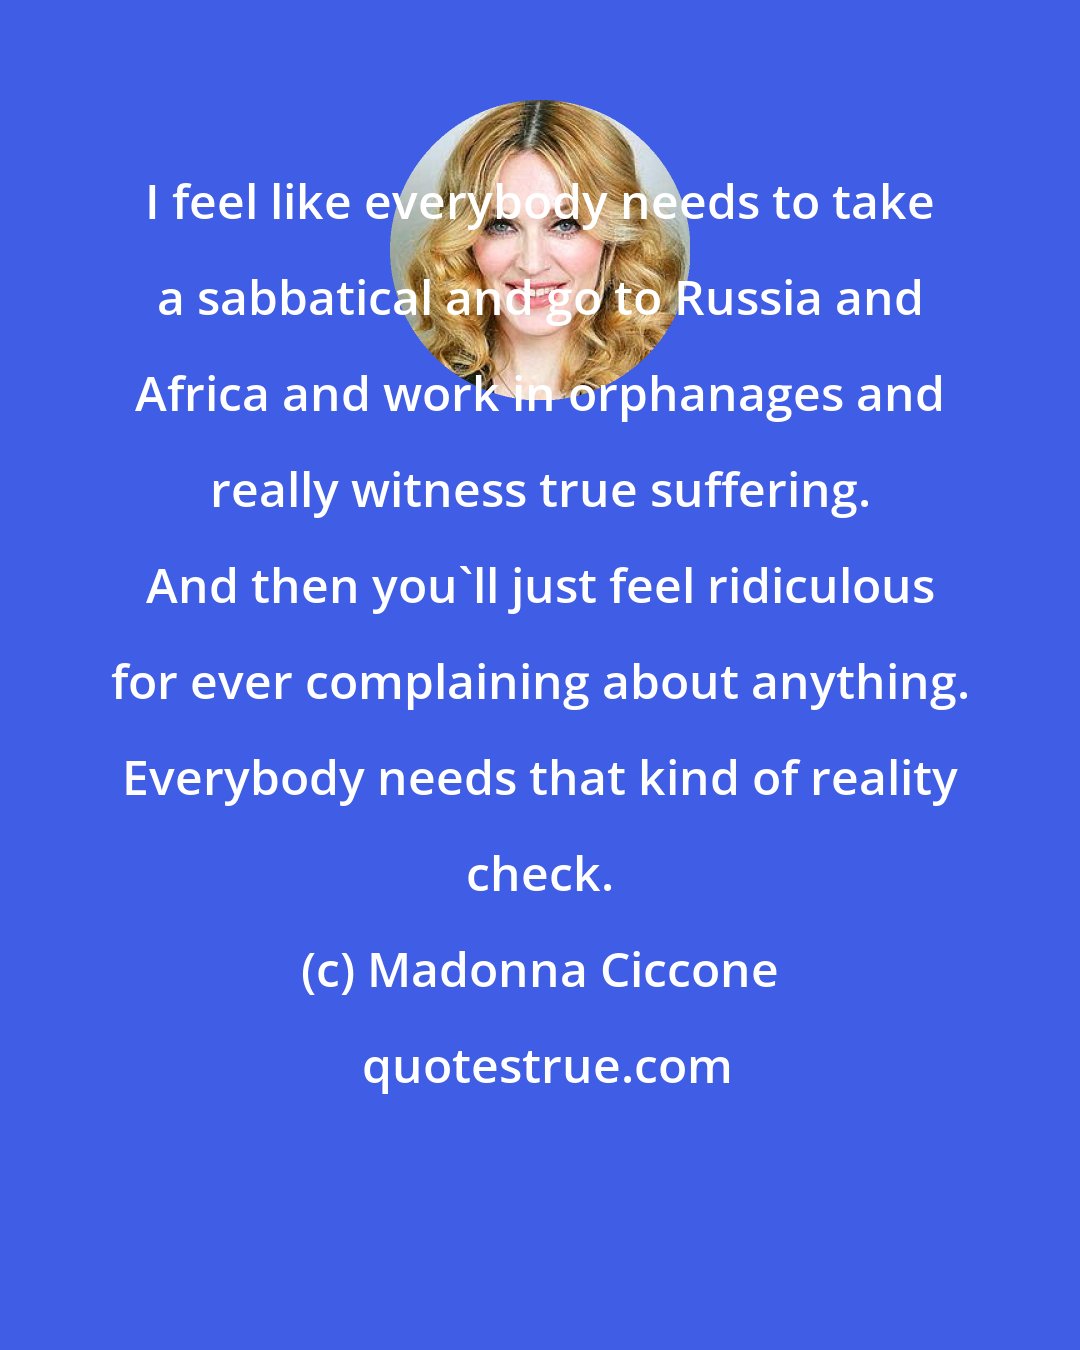 Madonna Ciccone: I feel like everybody needs to take a sabbatical and go to Russia and Africa and work in orphanages and really witness true suffering. And then you'll just feel ridiculous for ever complaining about anything. Everybody needs that kind of reality check.